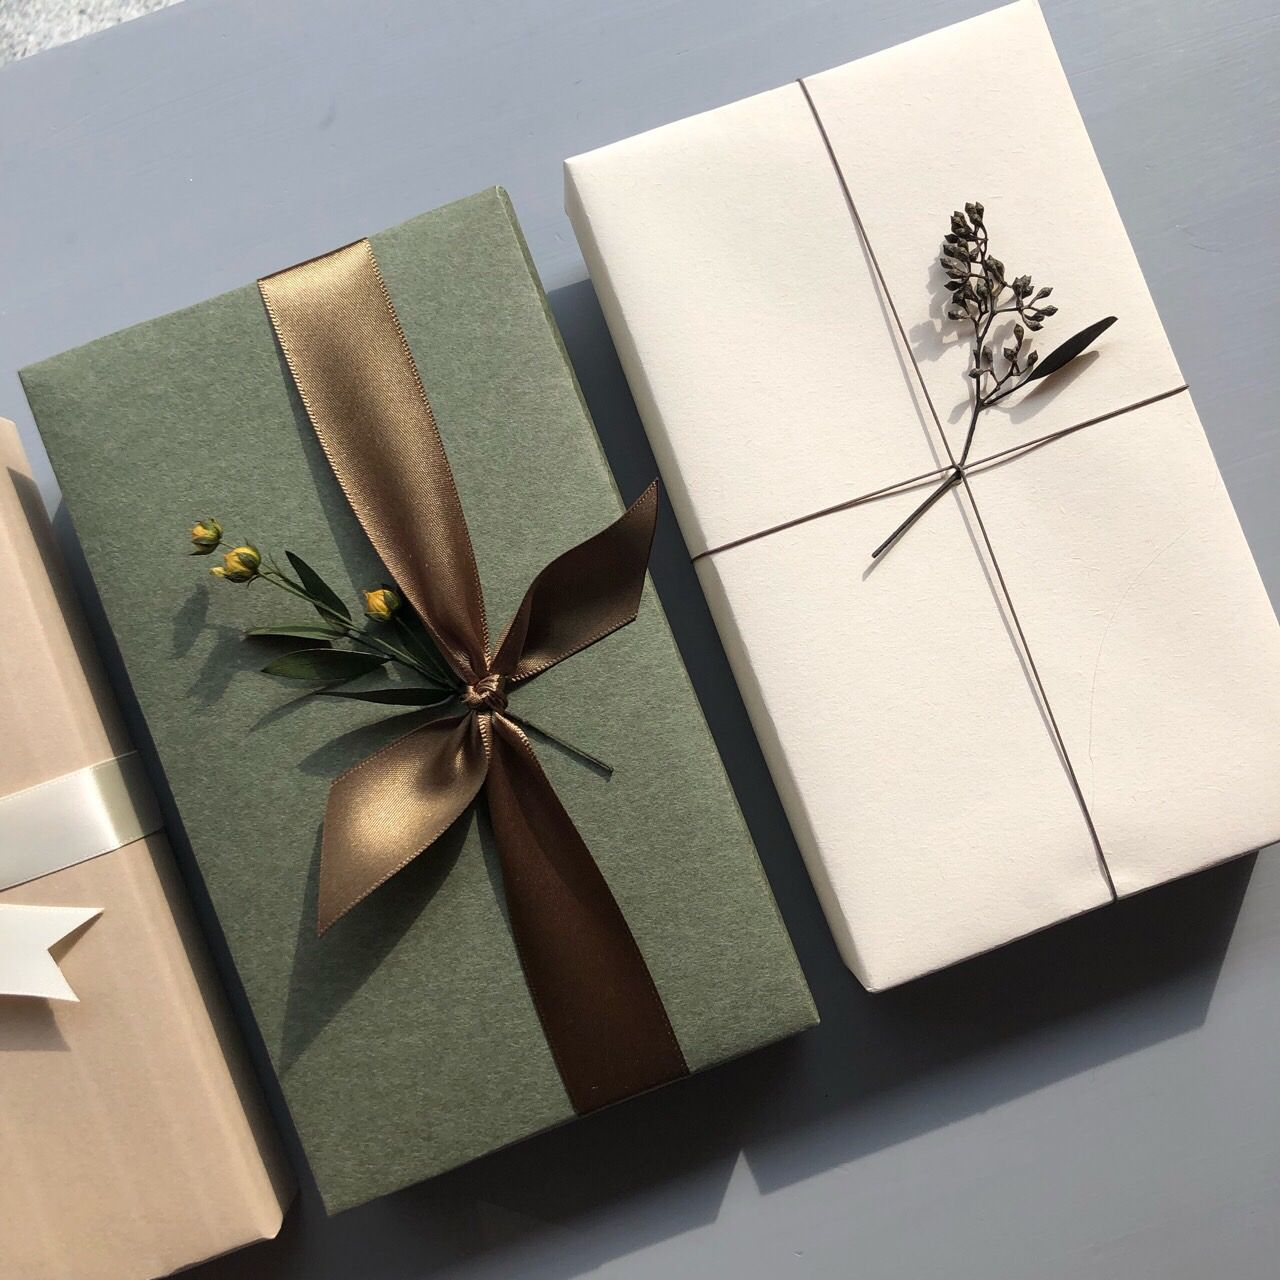 Gift Wrapping, Minimally.